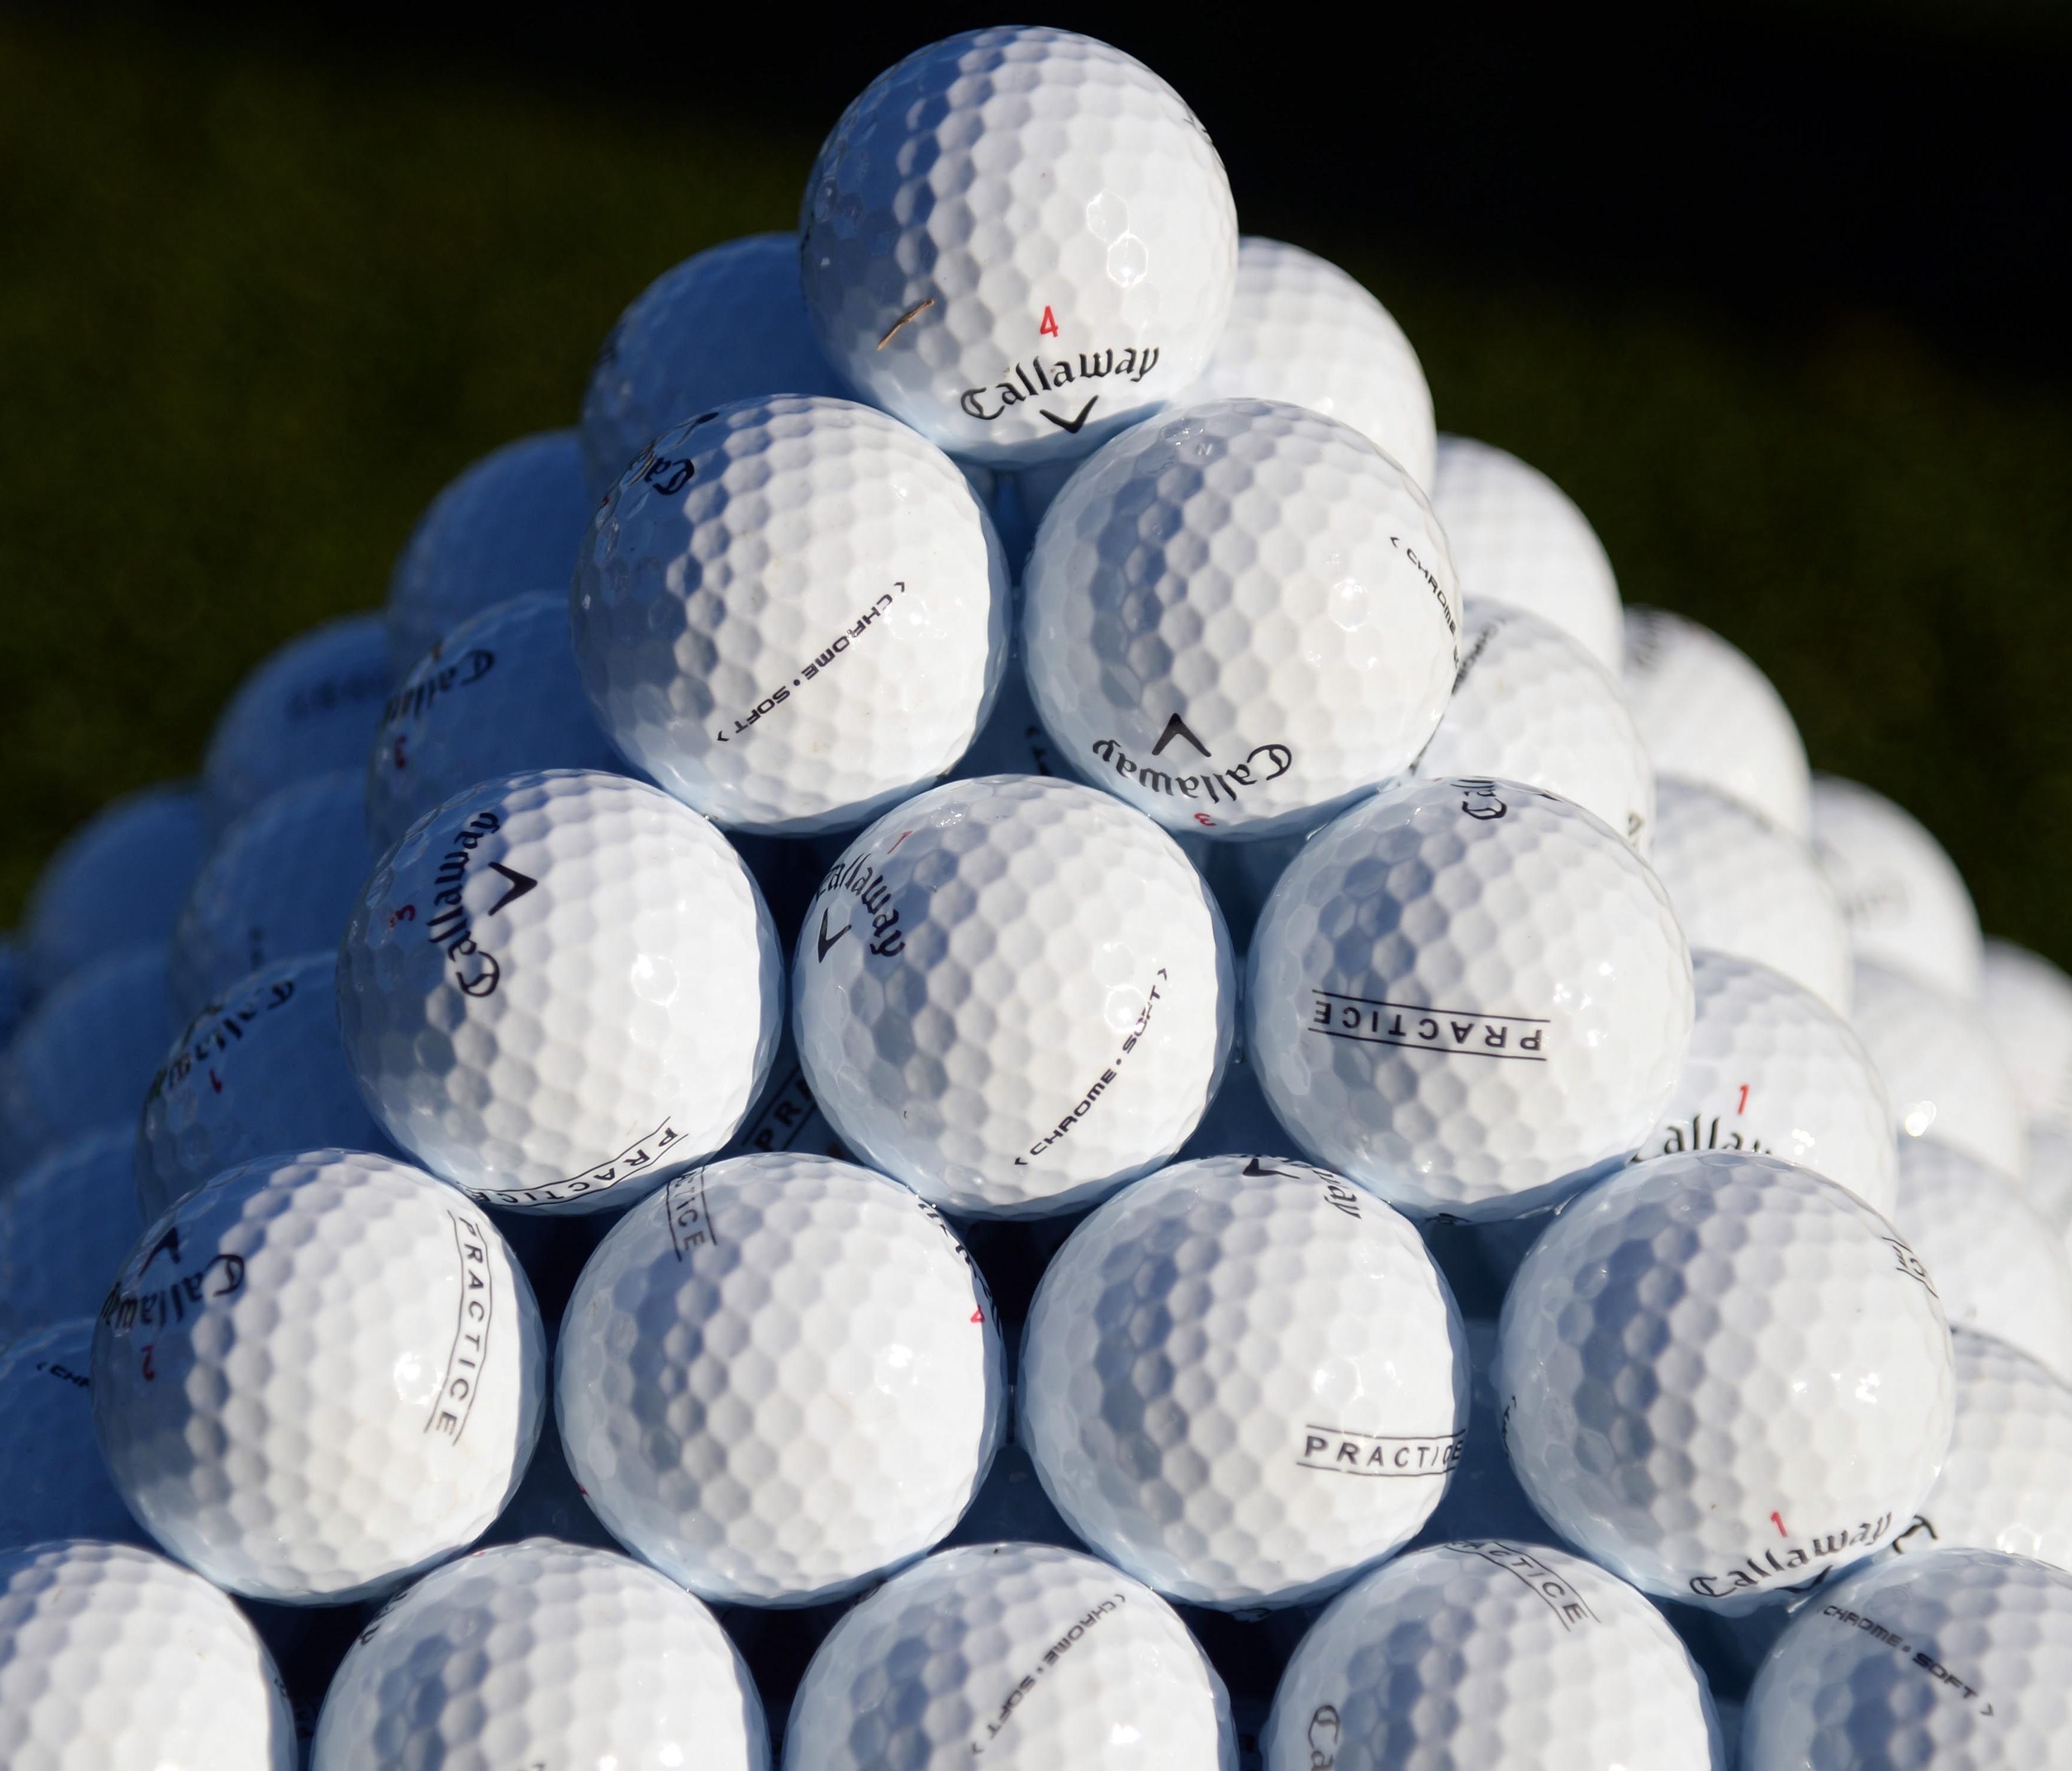 A detailed view of golf balls  stacked  during the third round of the CareerBuilder Challenge on Jan. 21.